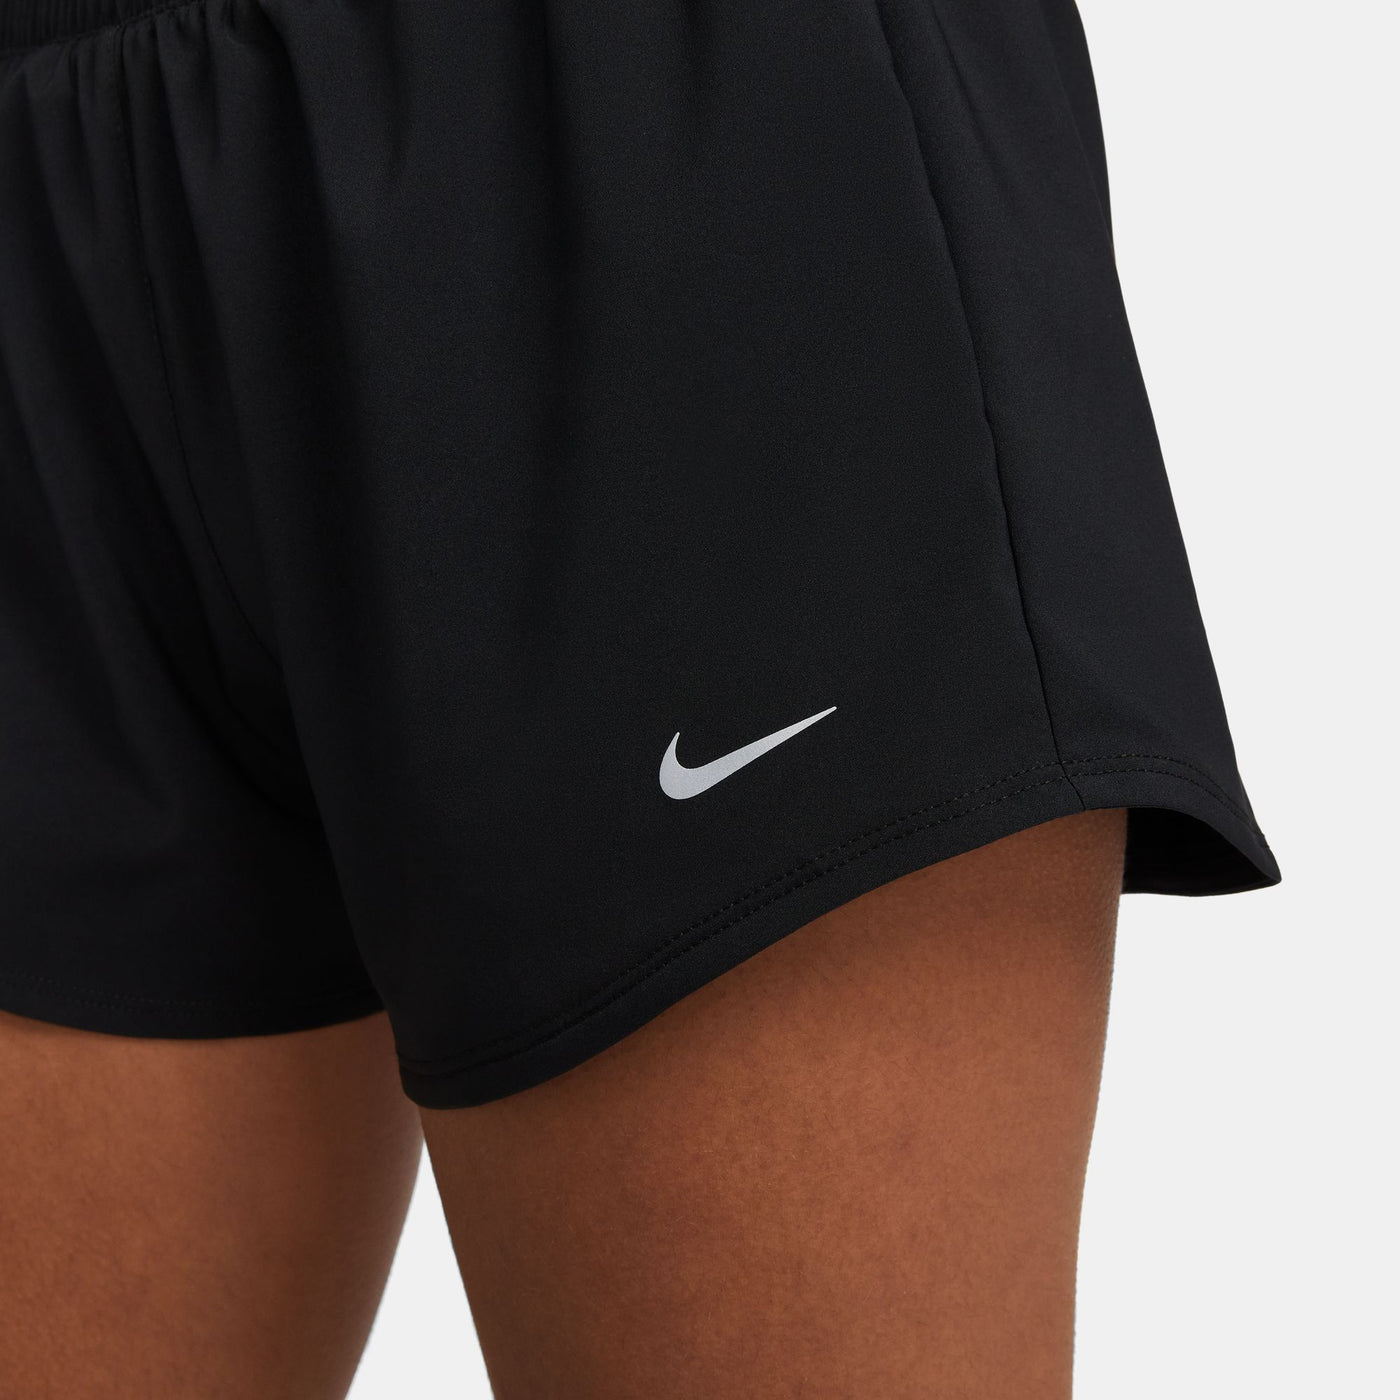 SHORT NIKE ONE 3PO FEMME - Sports Contact